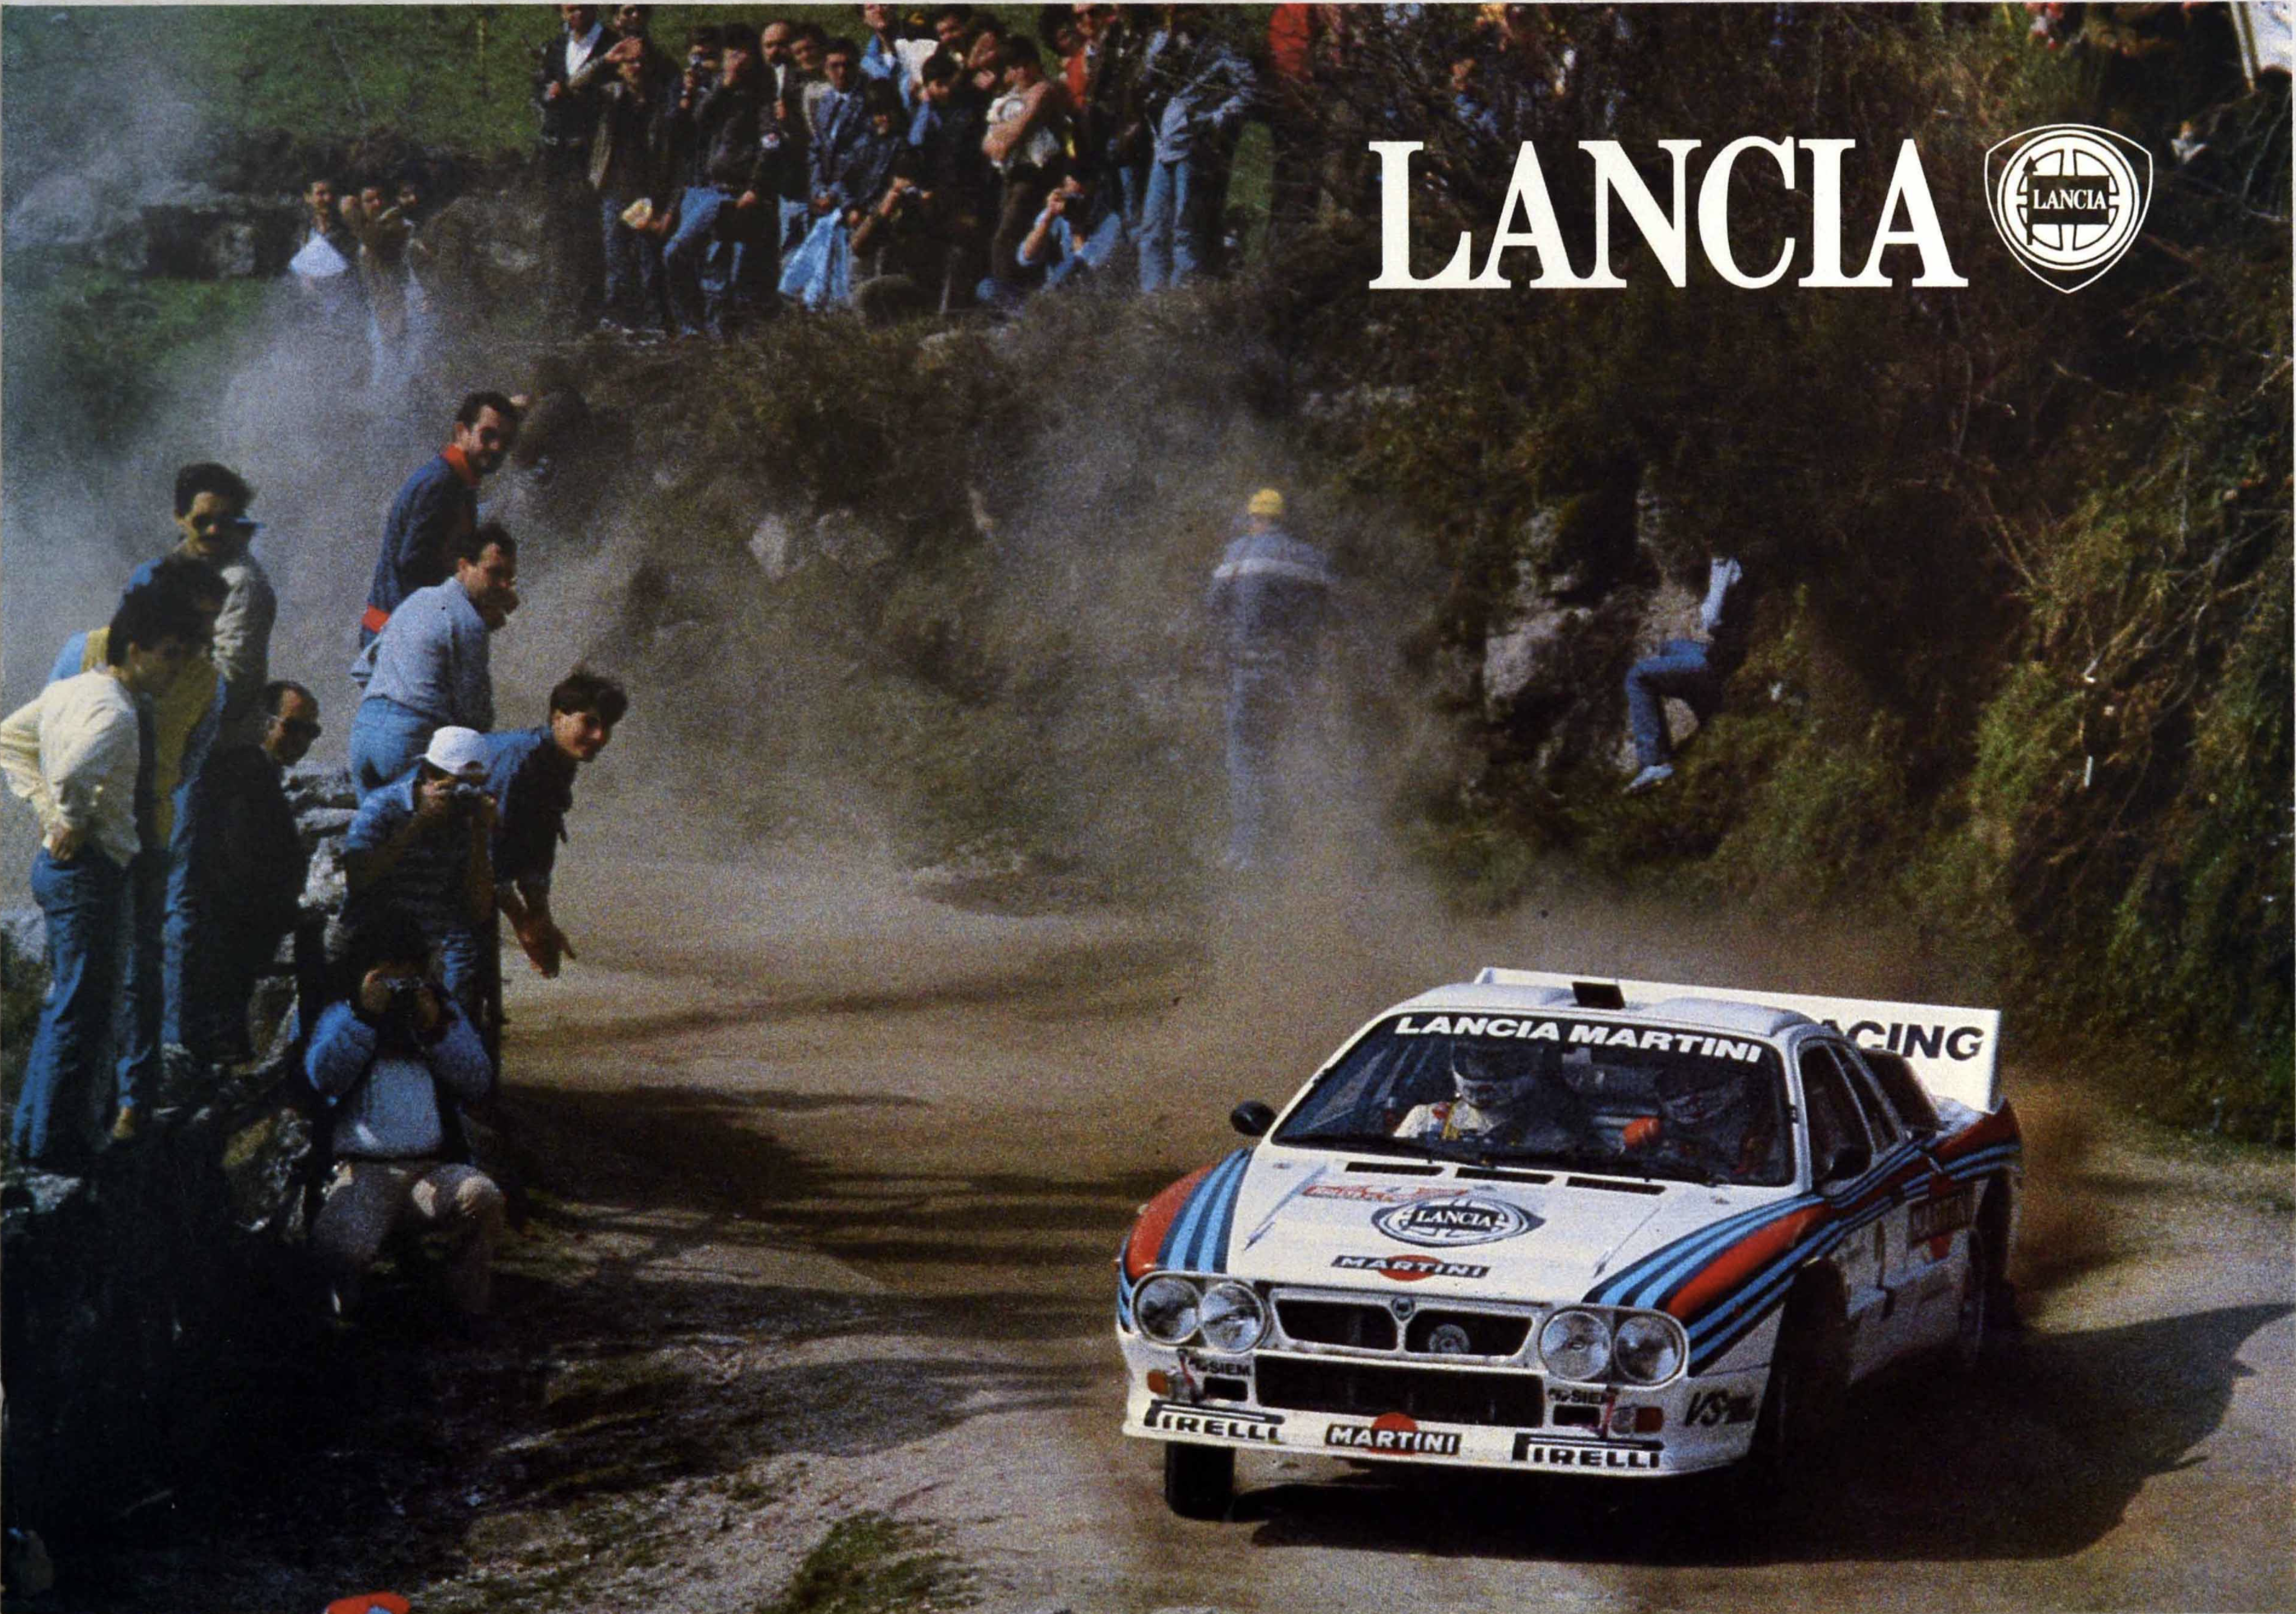 Lancia Martini rally poster from 1970s